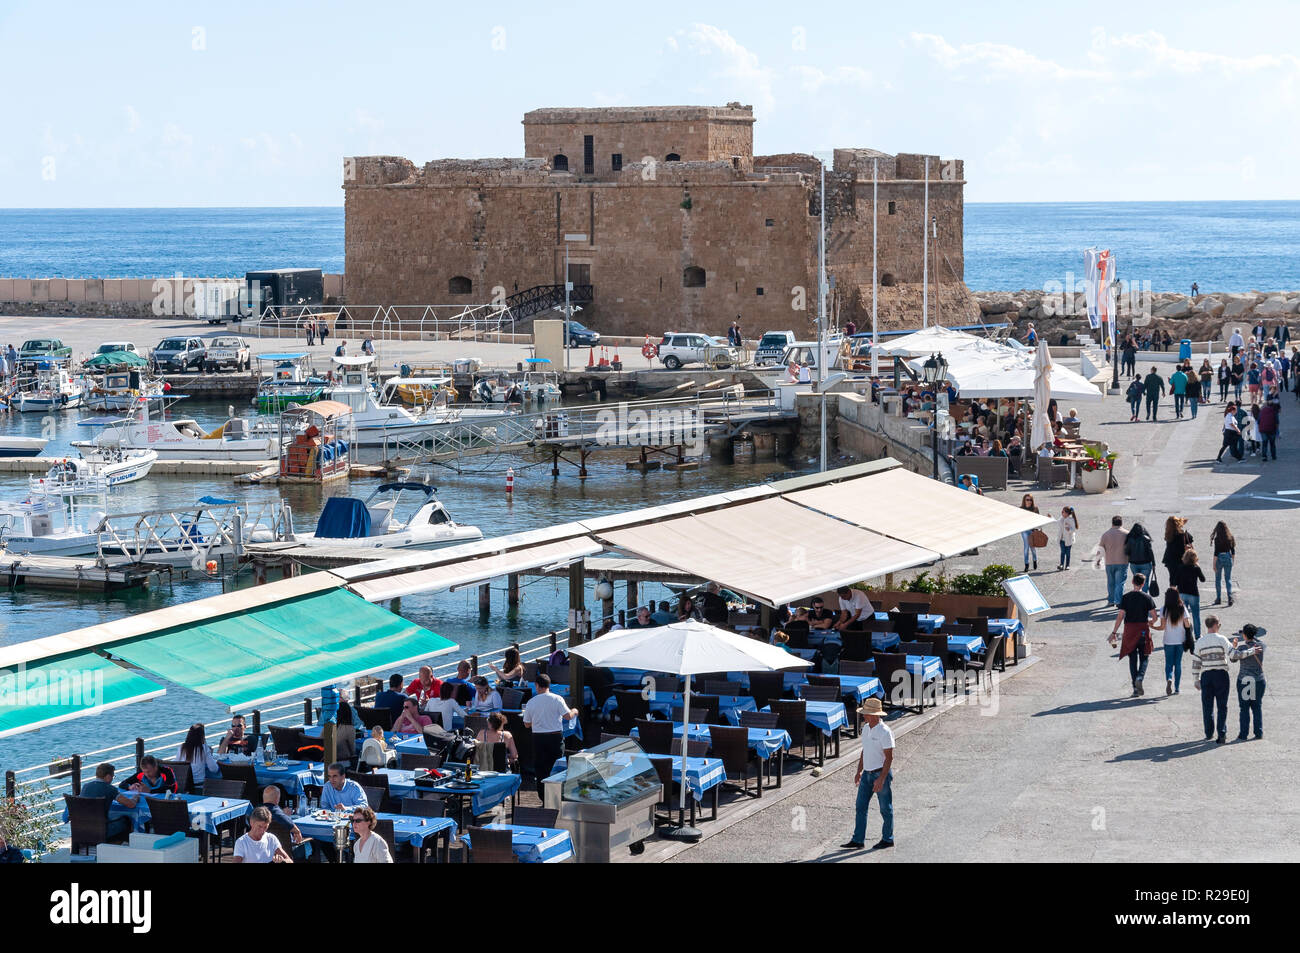 Paphos Harbour and Medieval Castle, Paphos (Pafos), Pafos District, Republic of Cyprus Stock Photo